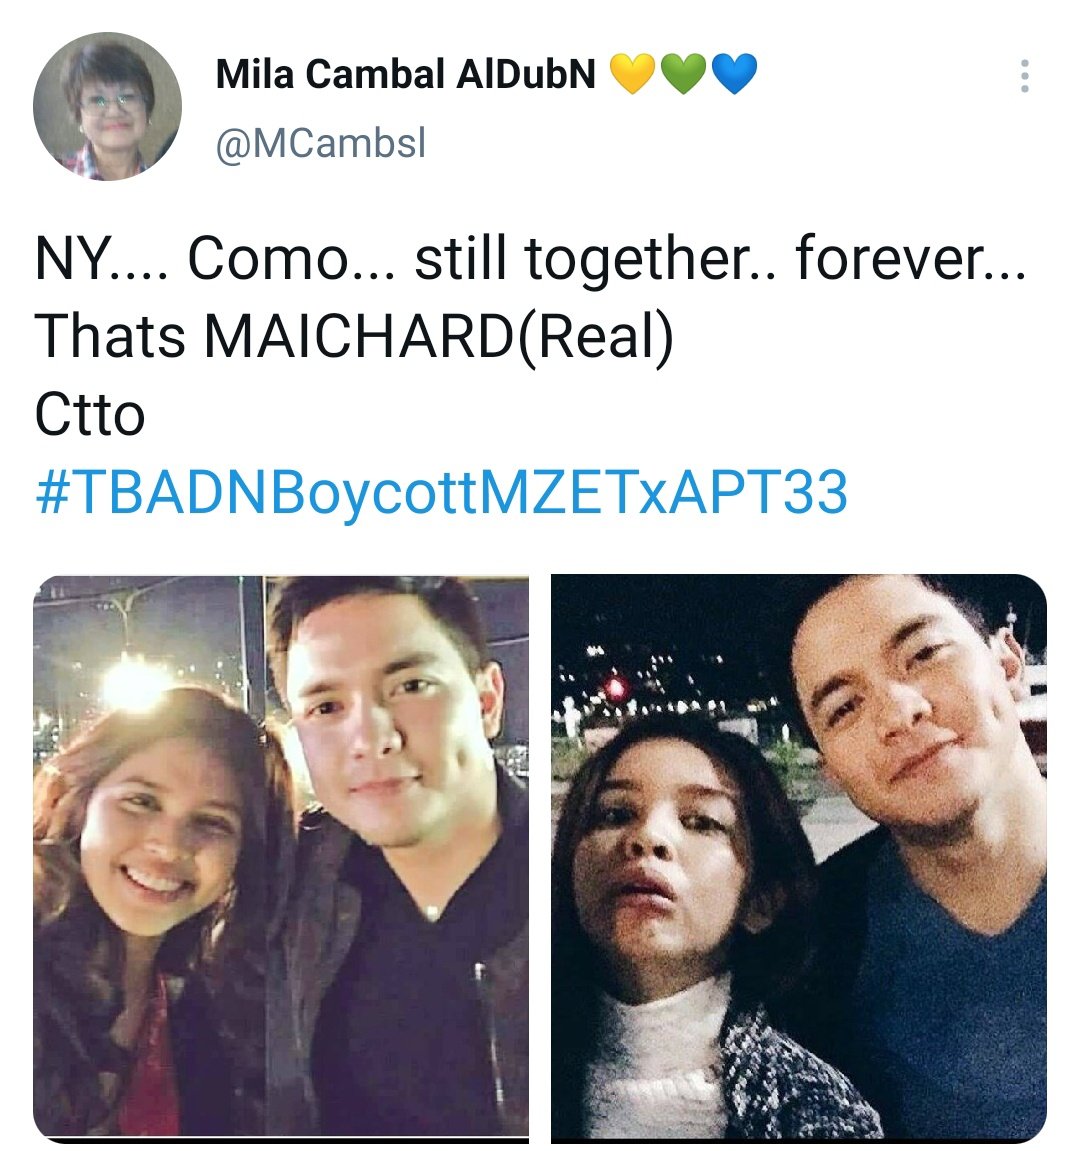  https://twitter.com/AxlLacey/status/1380528620813185026?s=19 If left to their own devices and left well enough alone, Maine and Alden will find, meet and stay with each other again and again.  #TBADNBoycottMZETxAPT33